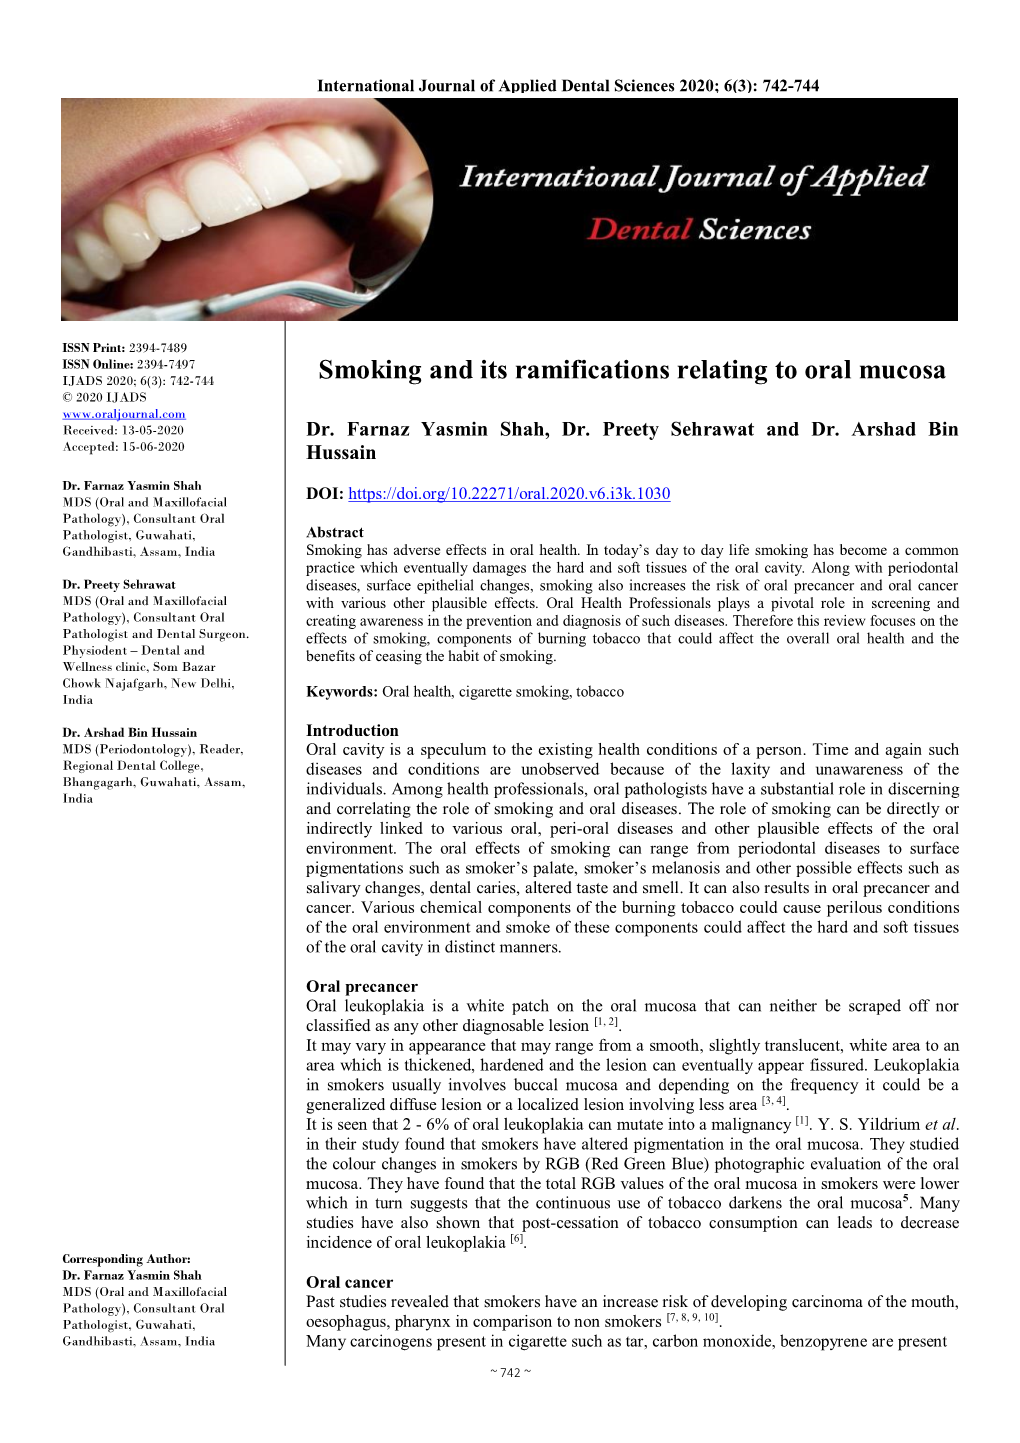 Smoking and Its Ramifications Relating to Oral Mucosa © 2020 IJADS Received: 13-05-2020 Dr